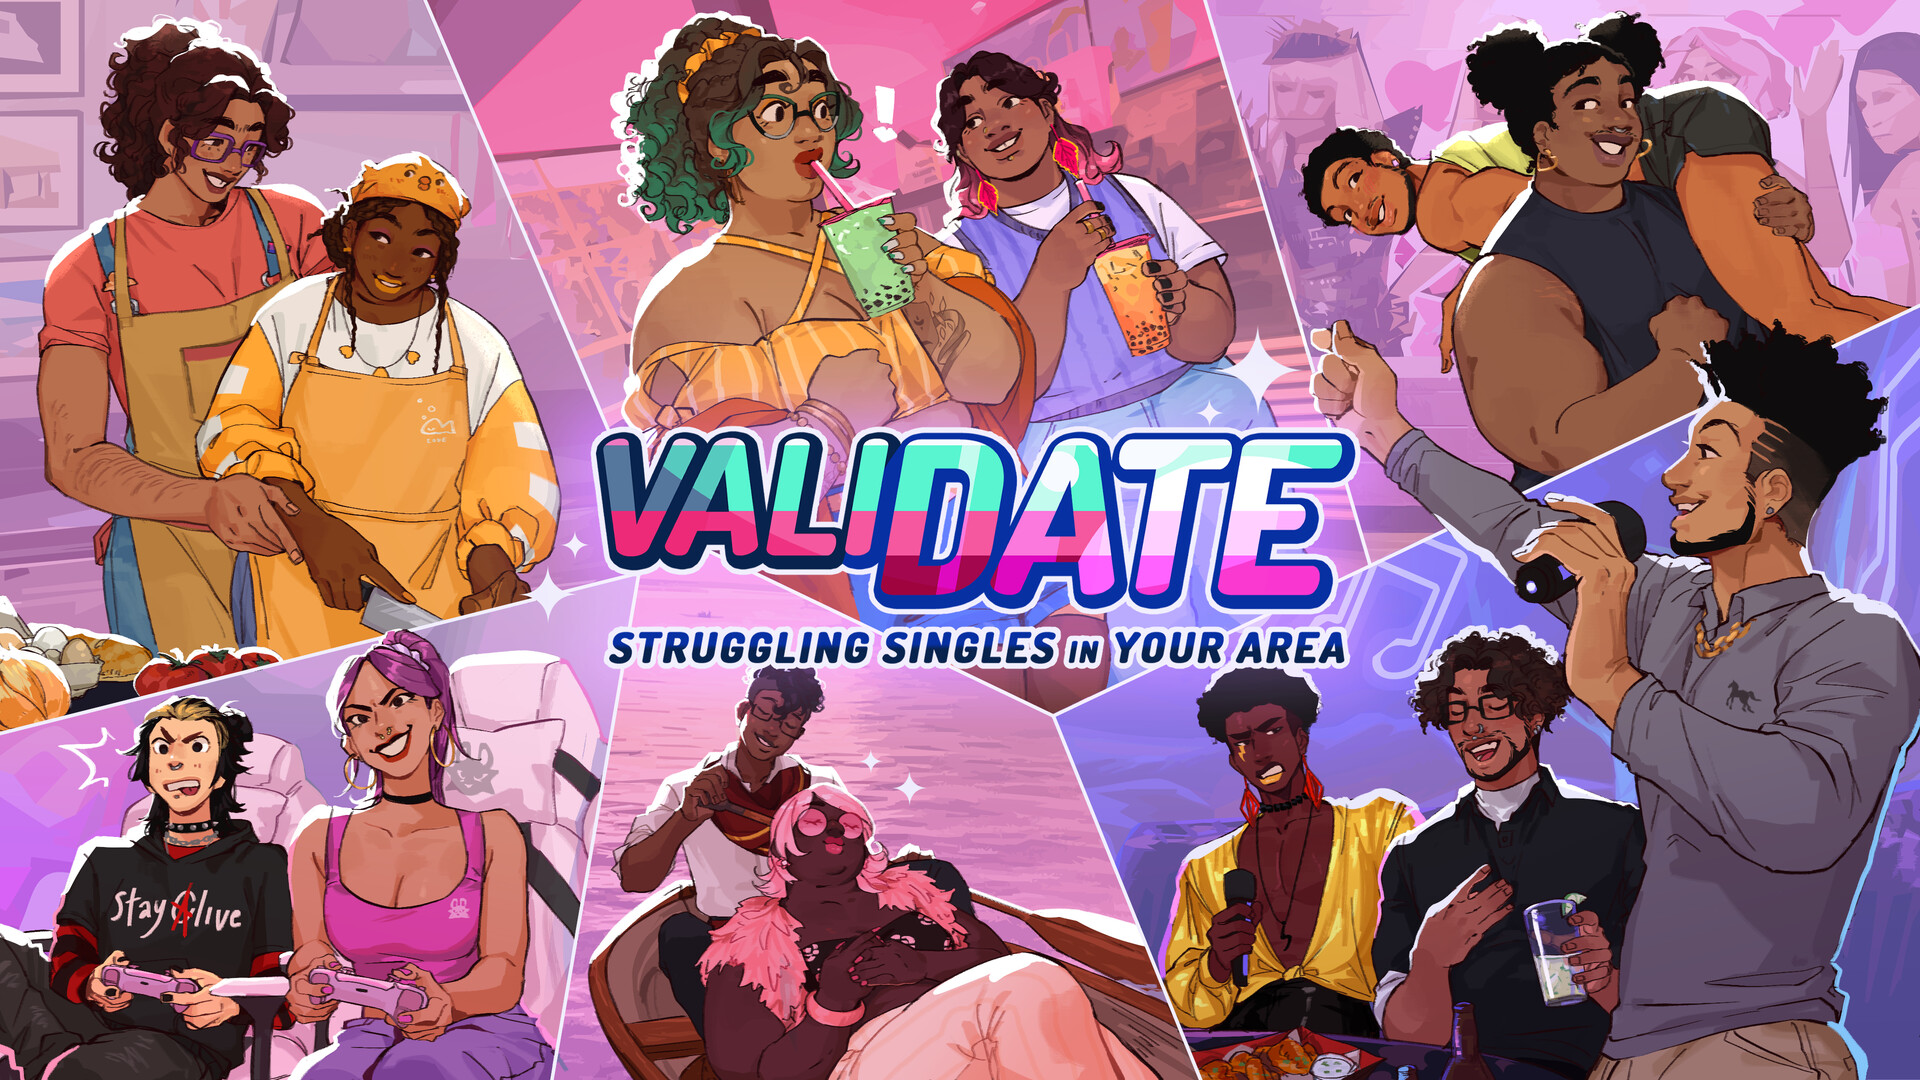 Official key art for ValiDate